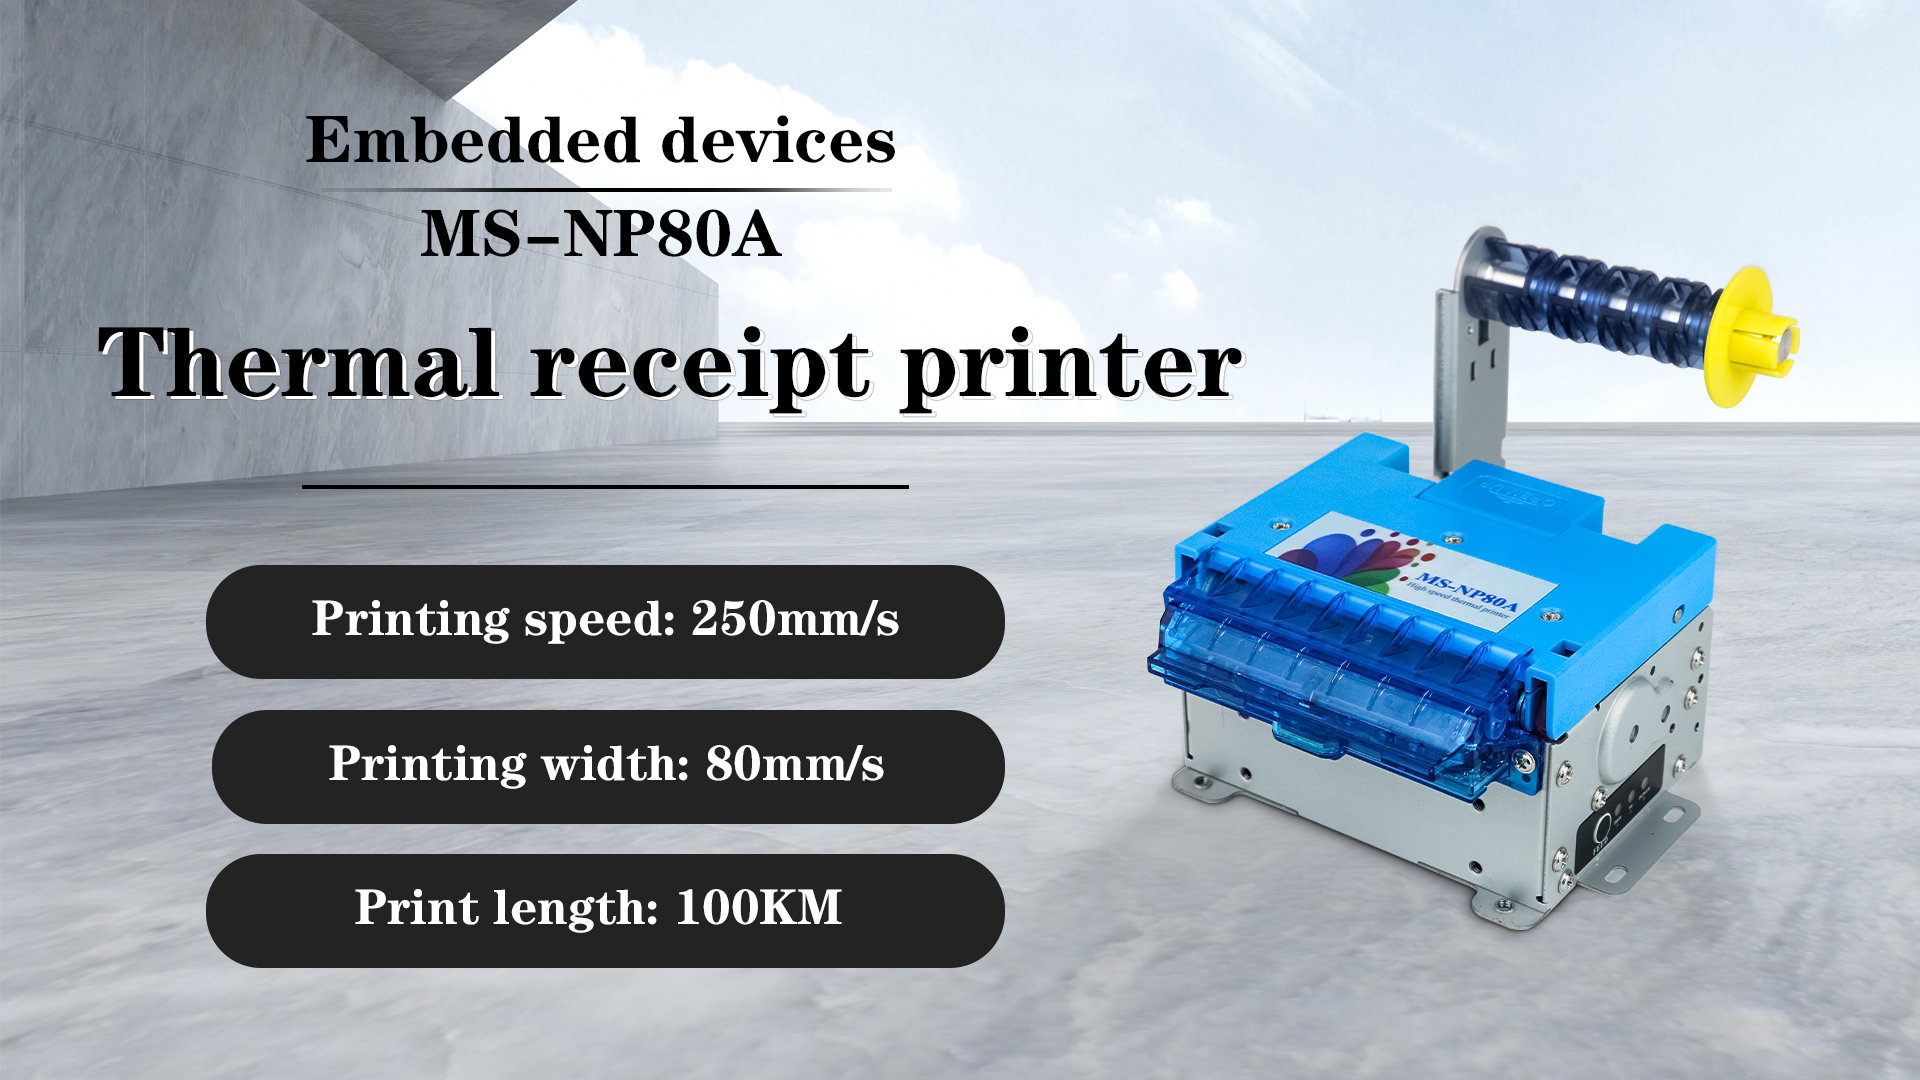 Application of MASUNG 80mm embedded thermal printer MS-NP80A in airport self-service equipment